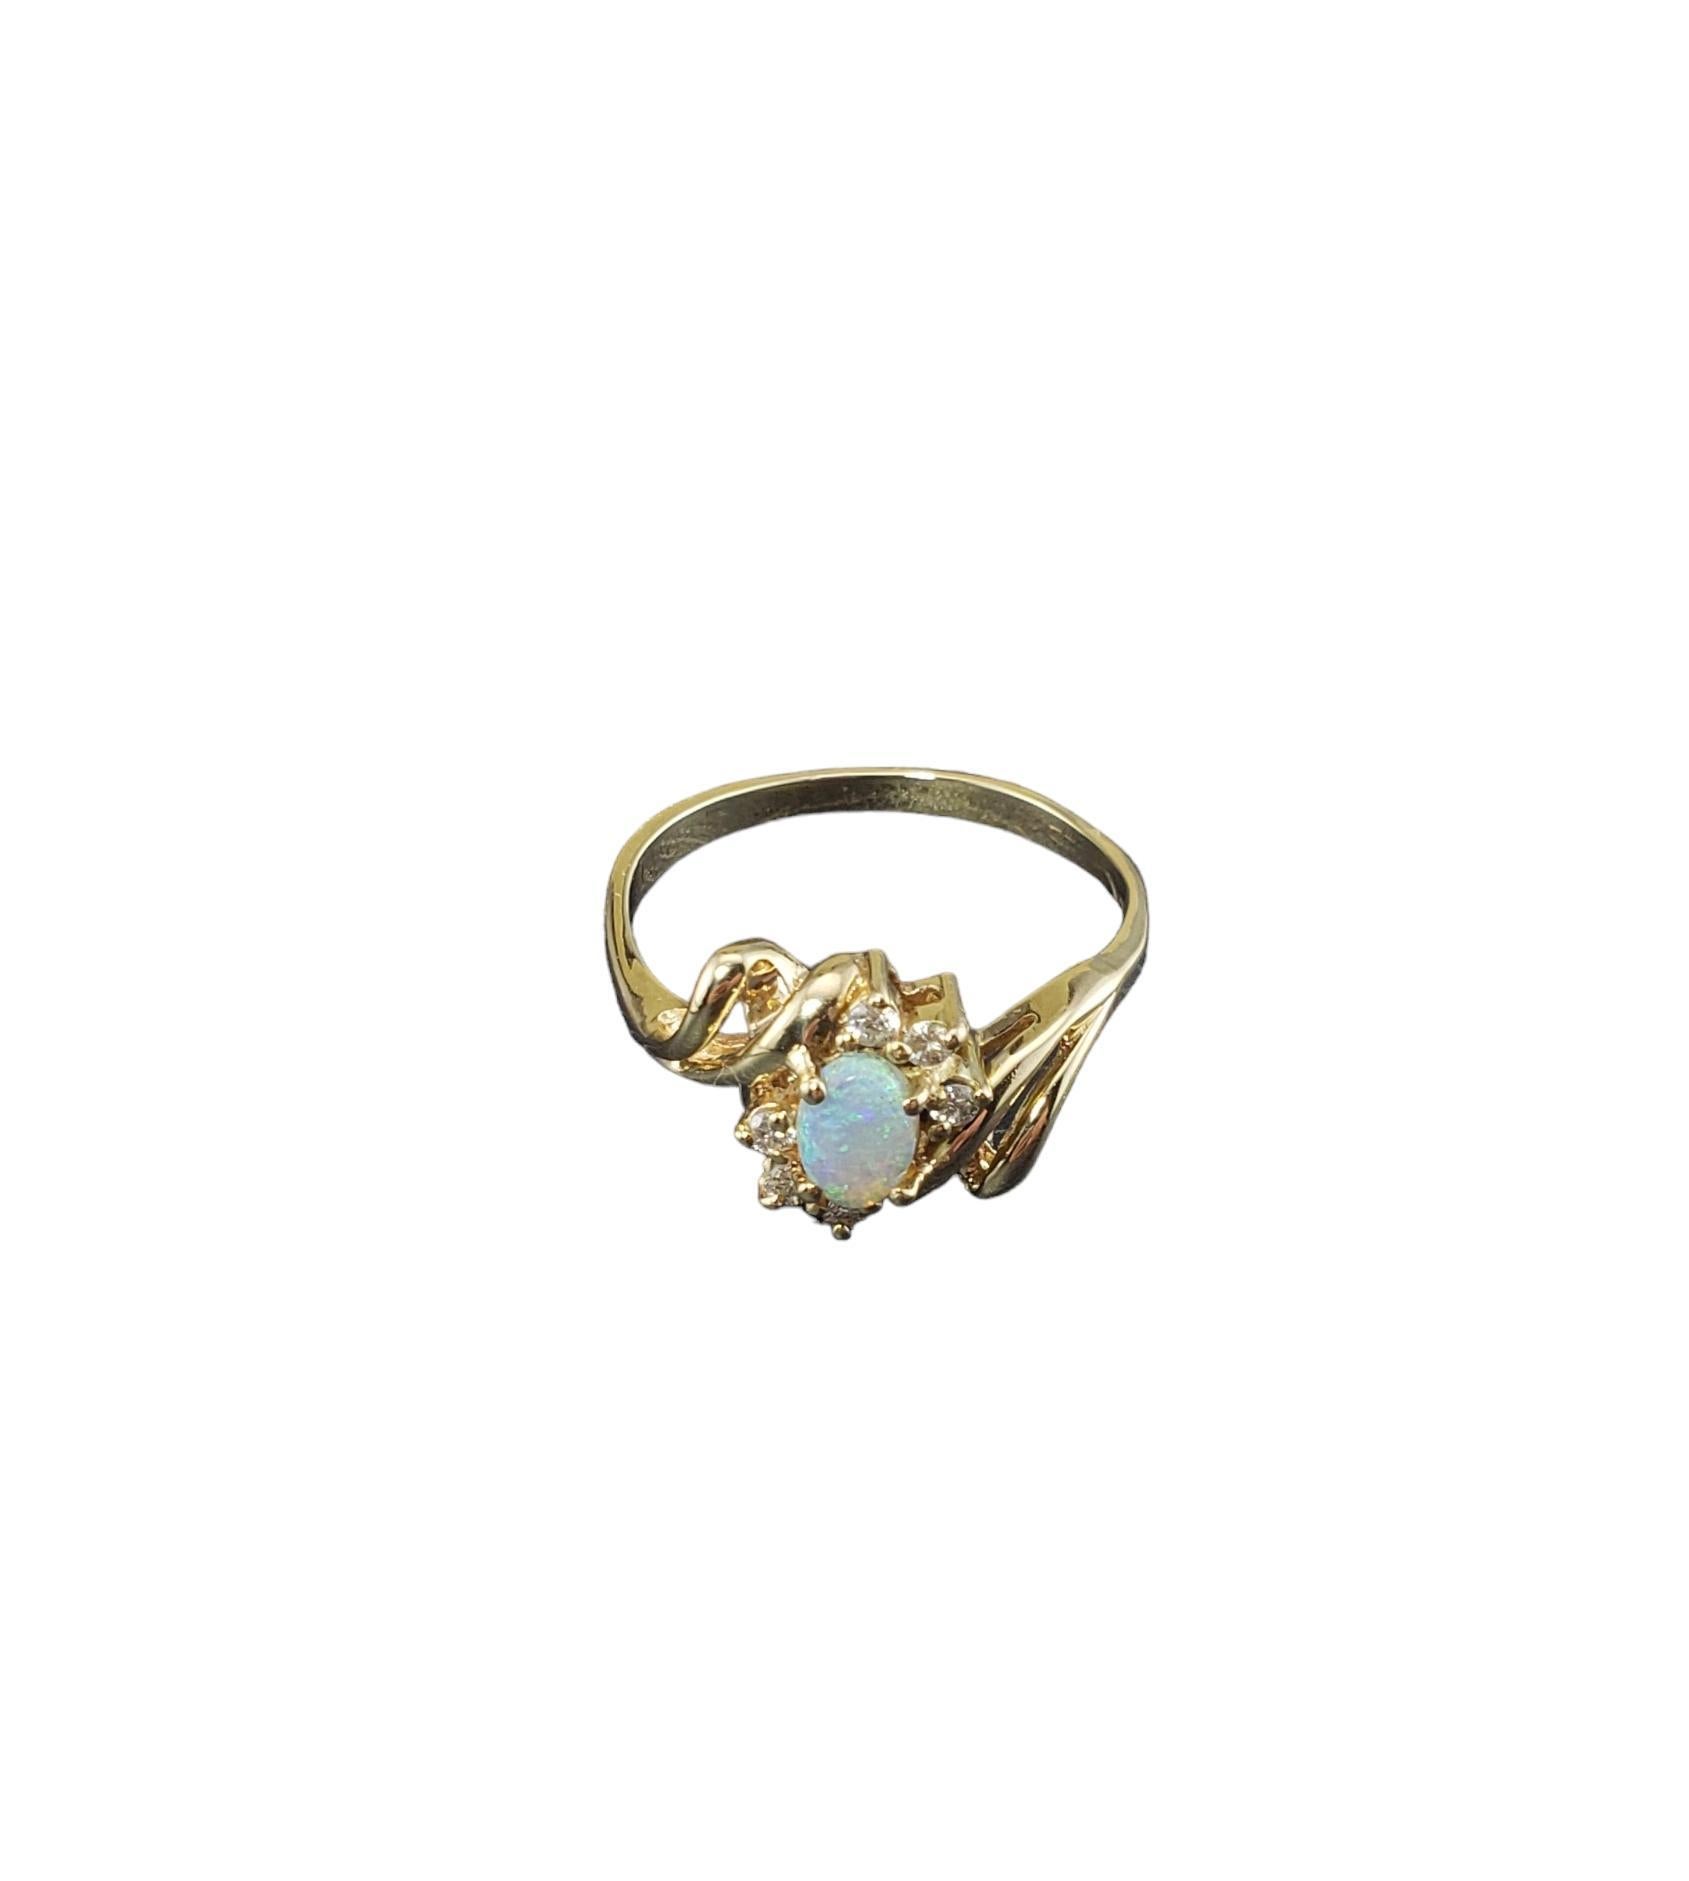 Vintage 14K Yellow Gold Opal and Diamond Ring Size 8.25-

This elegant ring features one oval opal stone (7 mm x 4 mm) and six round brilliant cut diamonds set in classic 14K yellow gold.  Width: 10 mm.  Shank: 2 mm.

Approximate total diamond